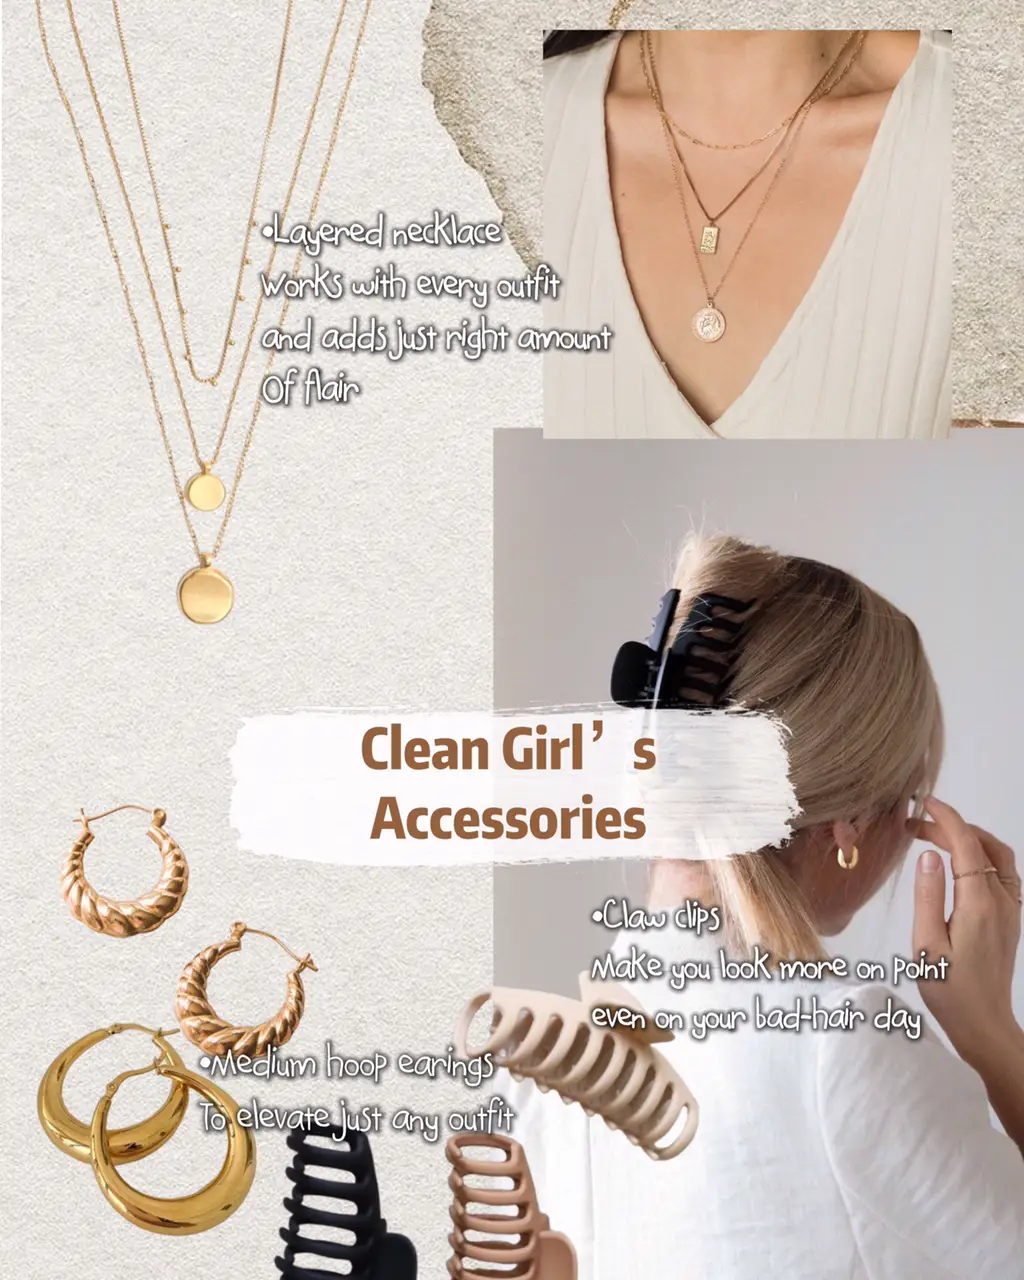 Why The 'Clean Girl' Aesthetic Is Problematic